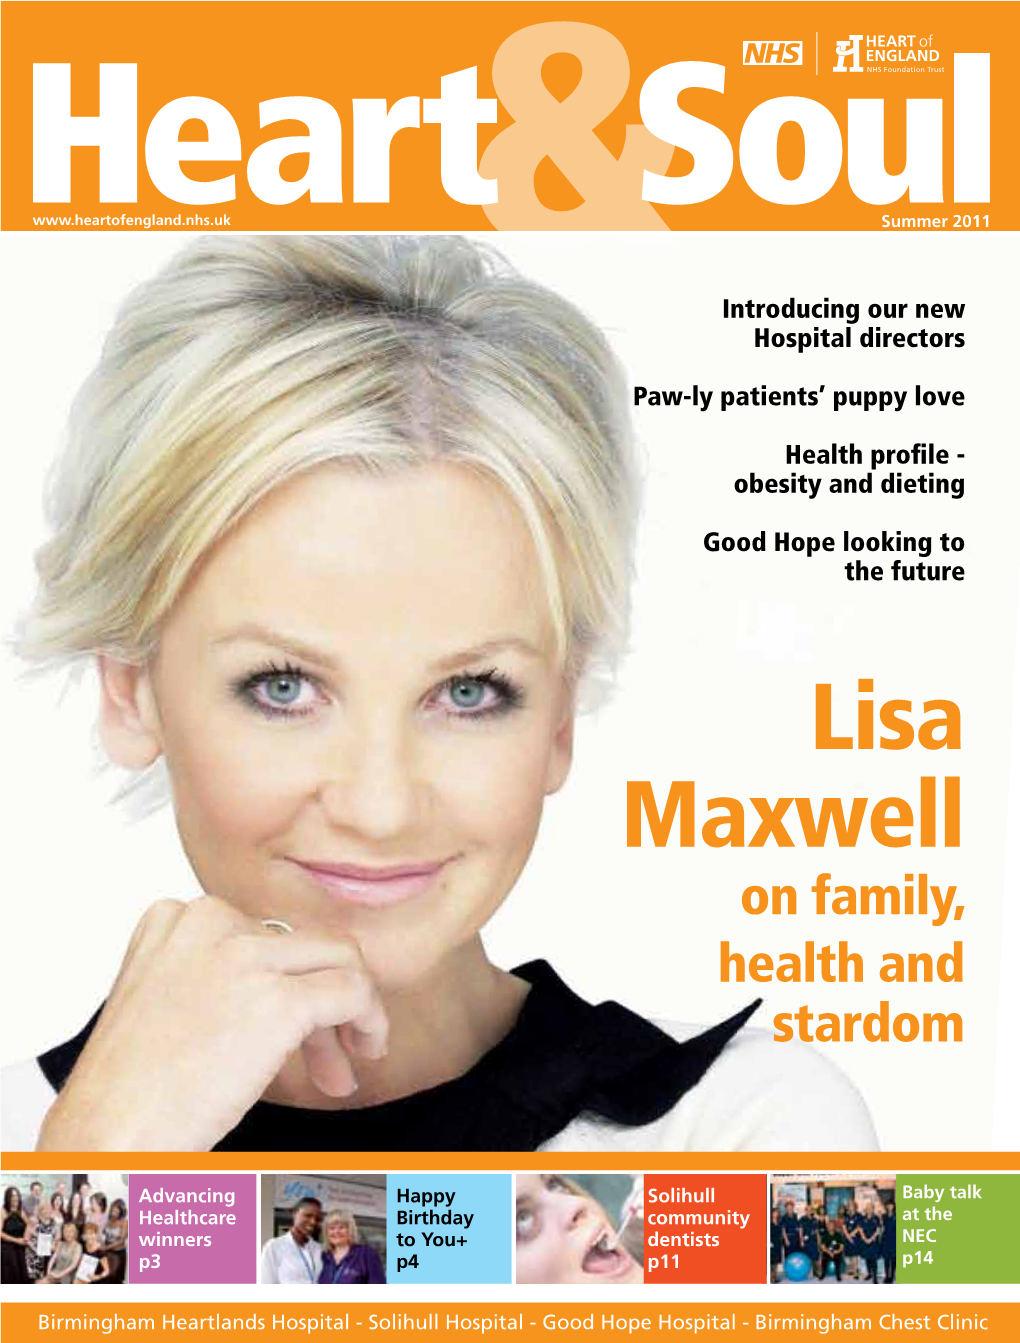 Lisa Maxwell on Family, Health and Stardom